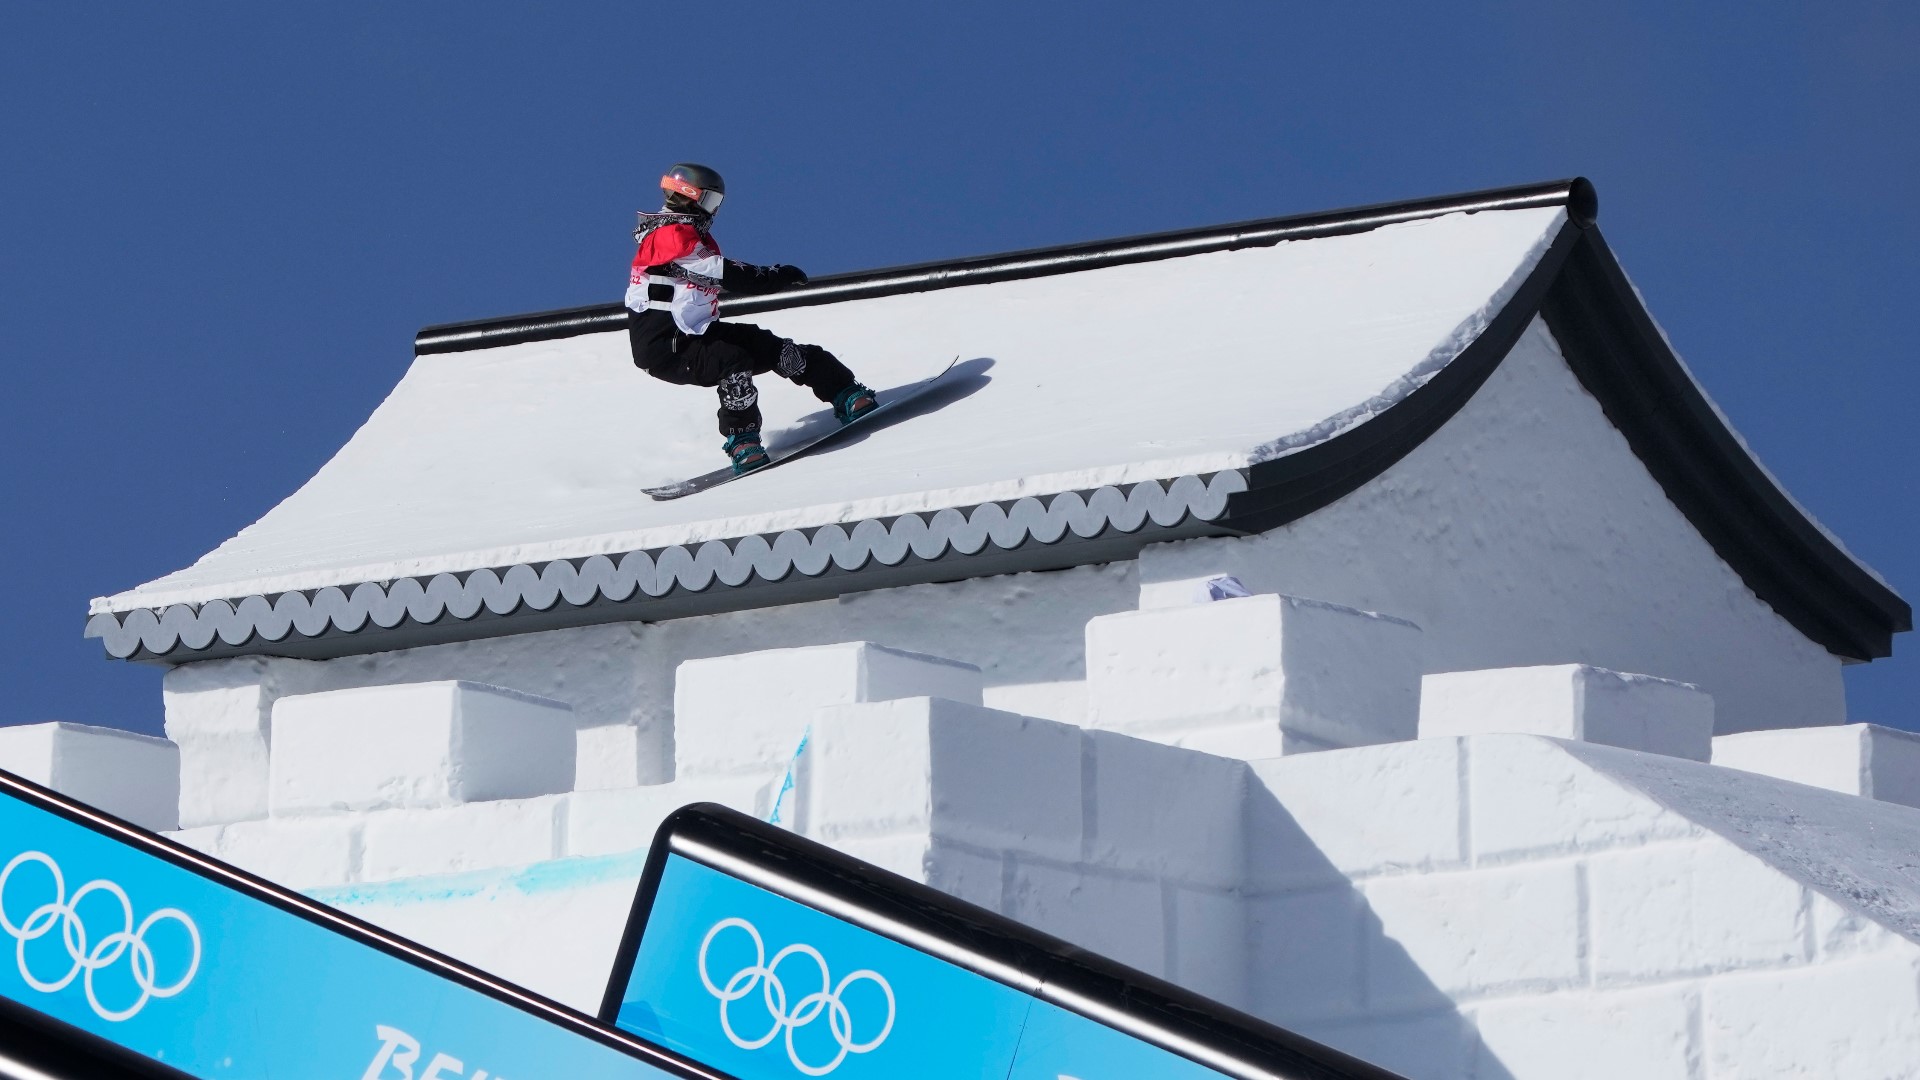 American Jamie Anderson has a chance to pick up her third gold medal in snowboard slopestyle. And the U.S. tries to stay on top in team figure skating.